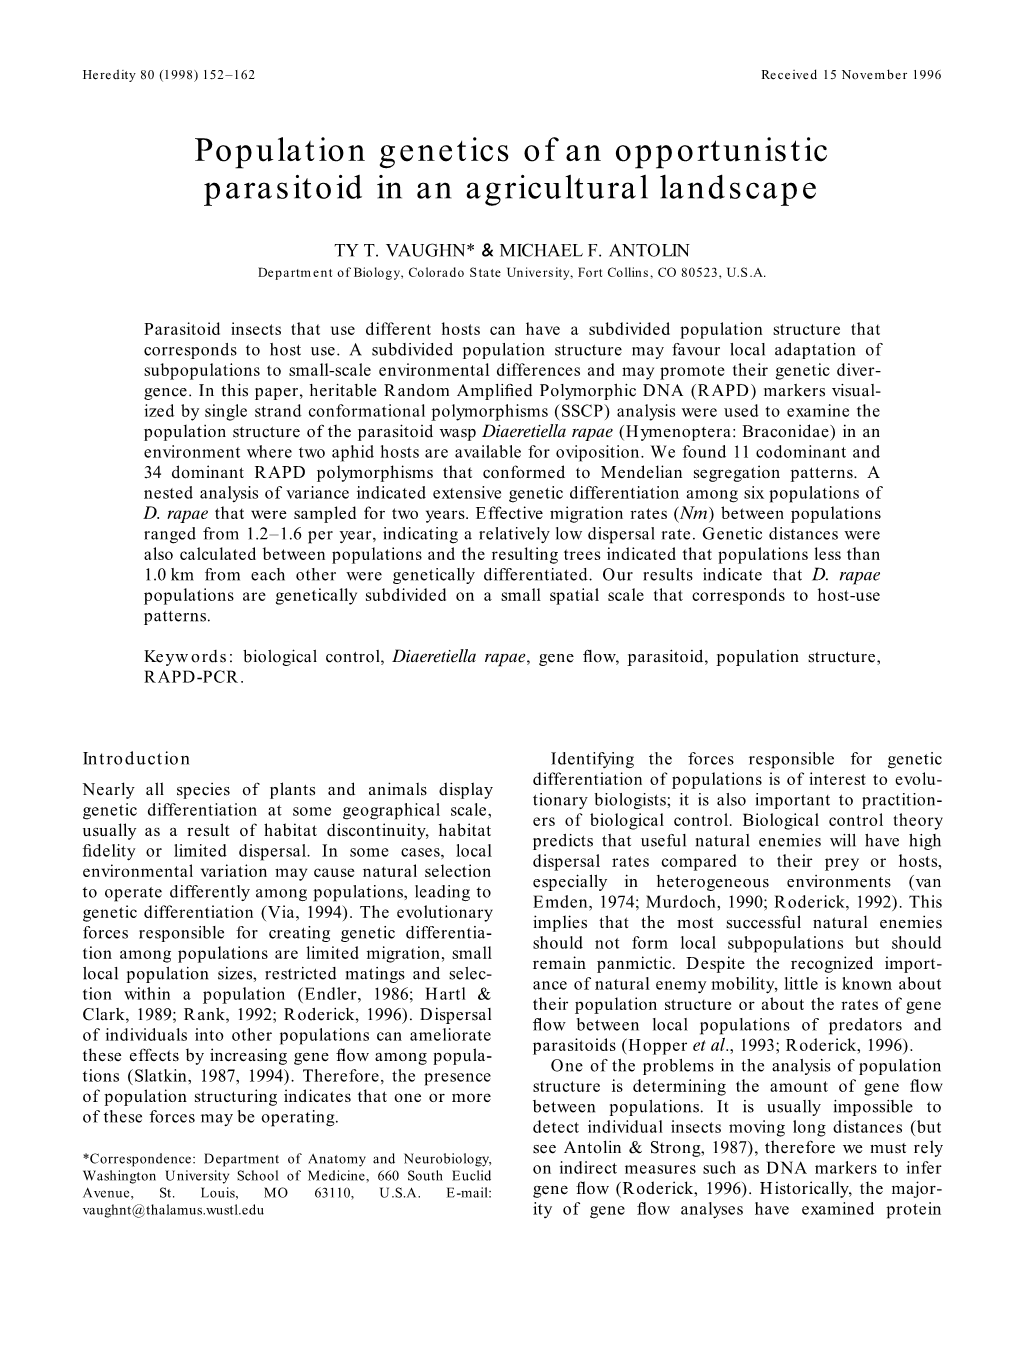 Population Genetics of an Opportunistic Parasitoid in an Agricultural Landscape